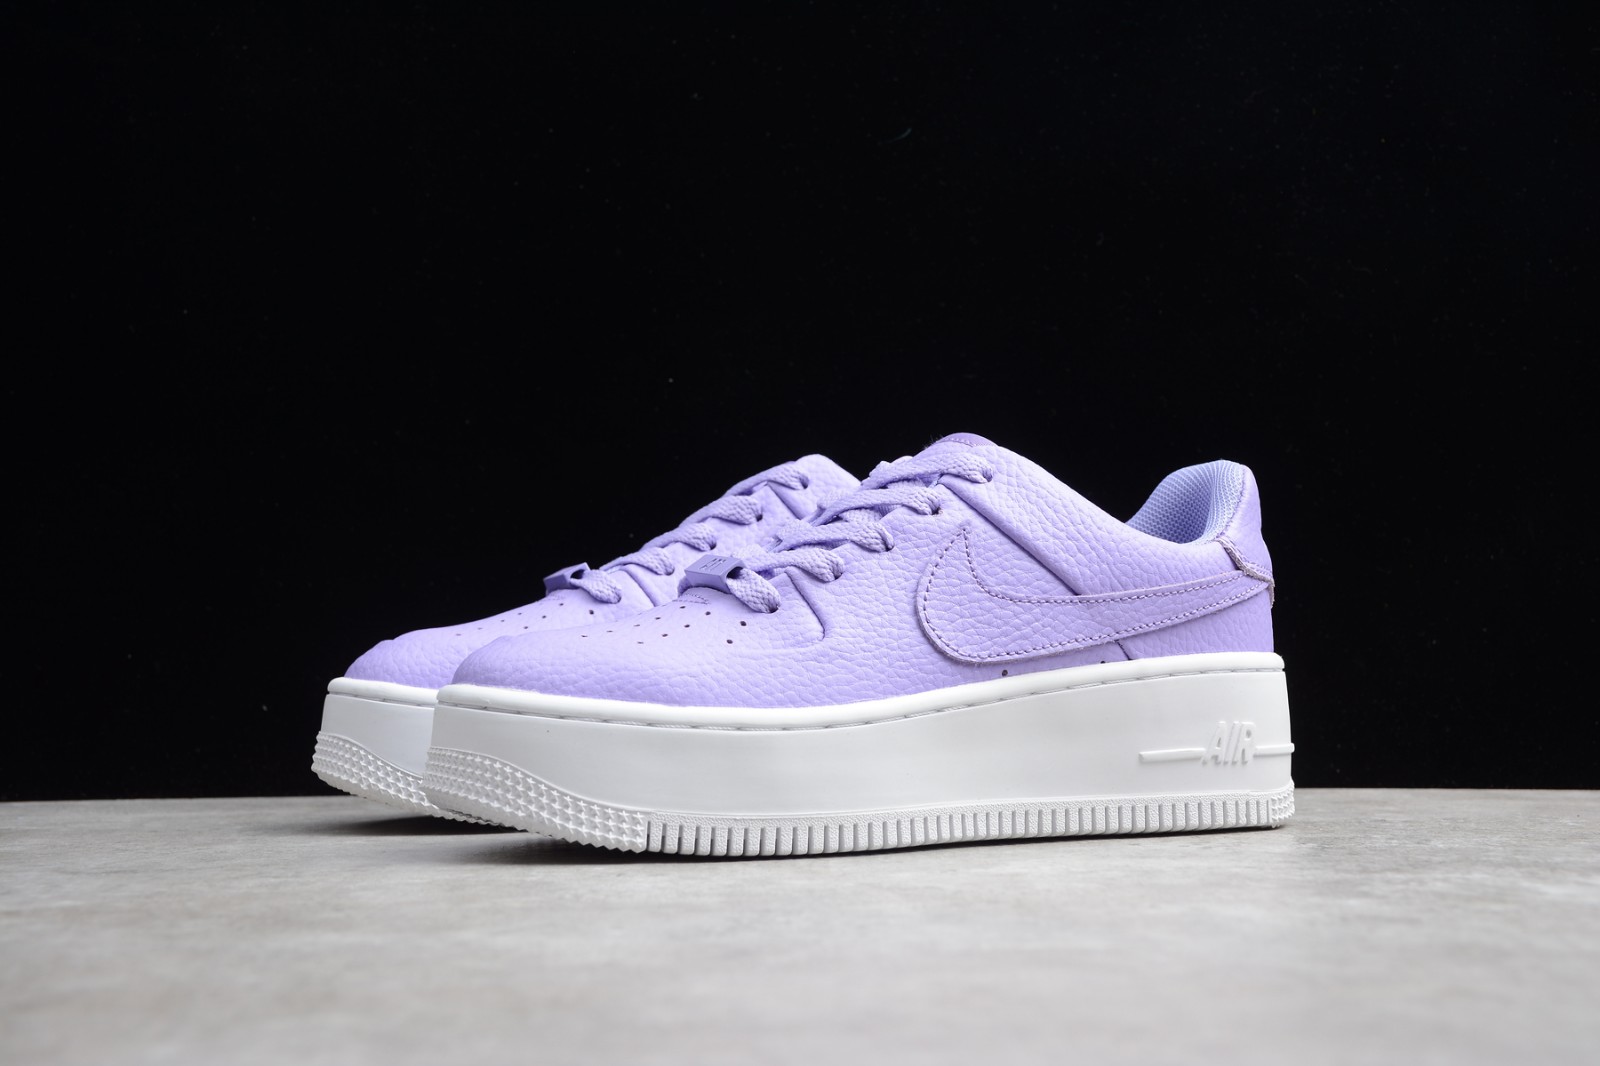 admiration Definitive shield 500 - and nike air force shoe sale women sneakers - StclaircomoShops - Nike  Air Force 1 Sage Low Oxygen Purple White AR5339